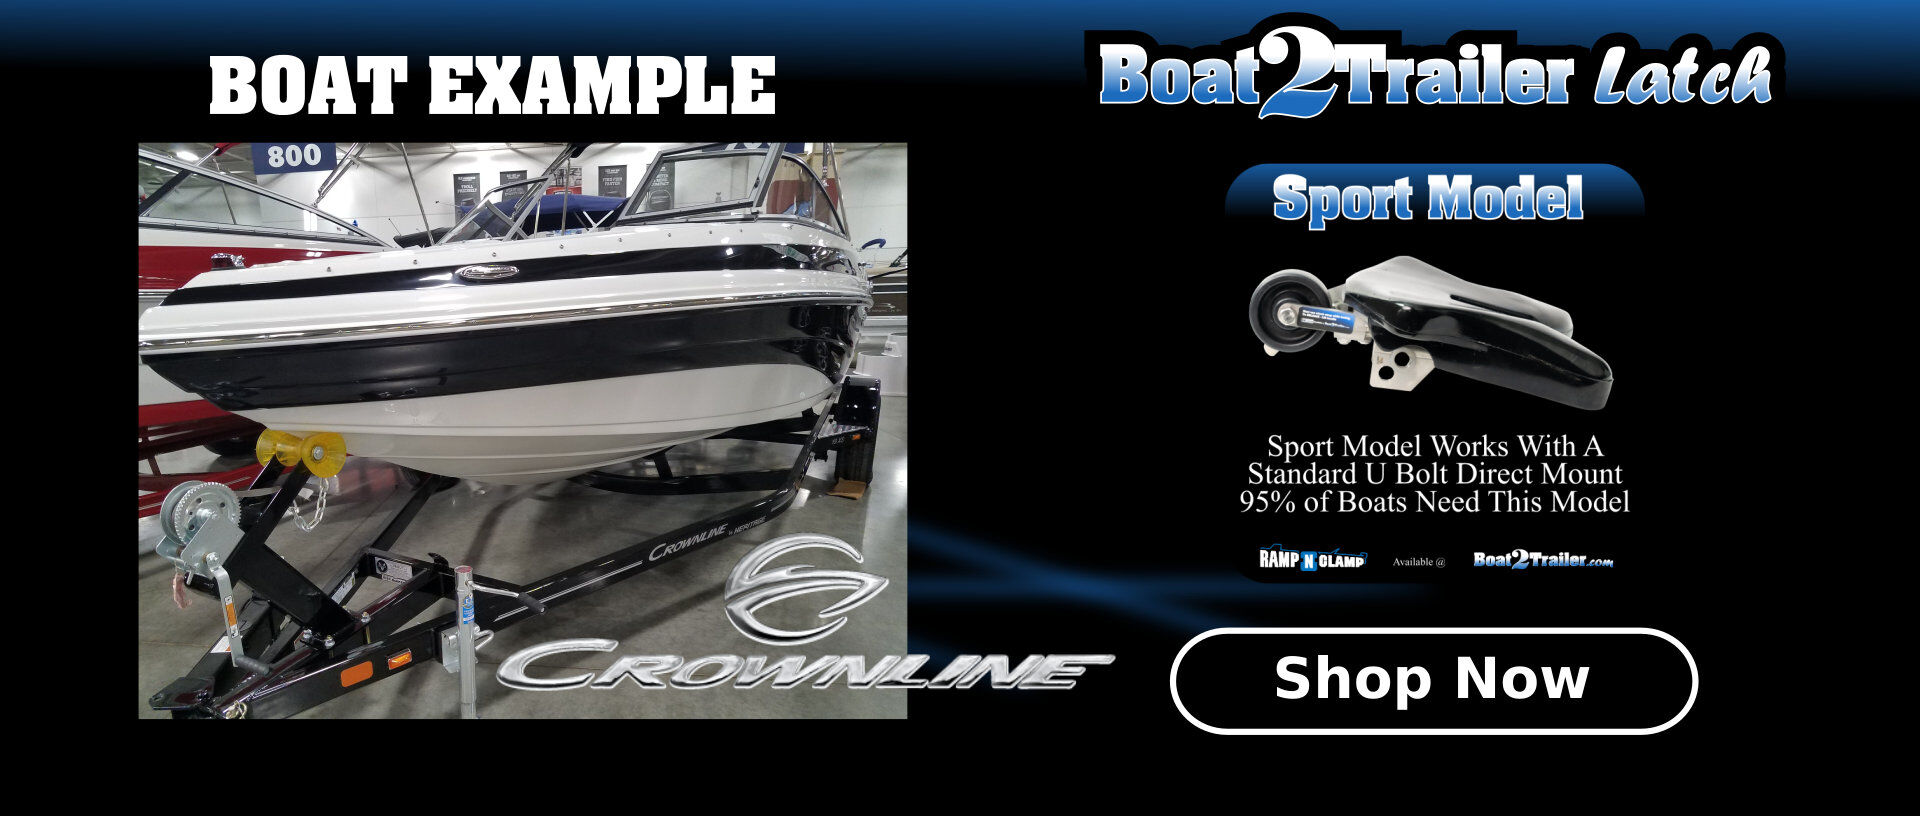 Crownline Automatic Boat Latch